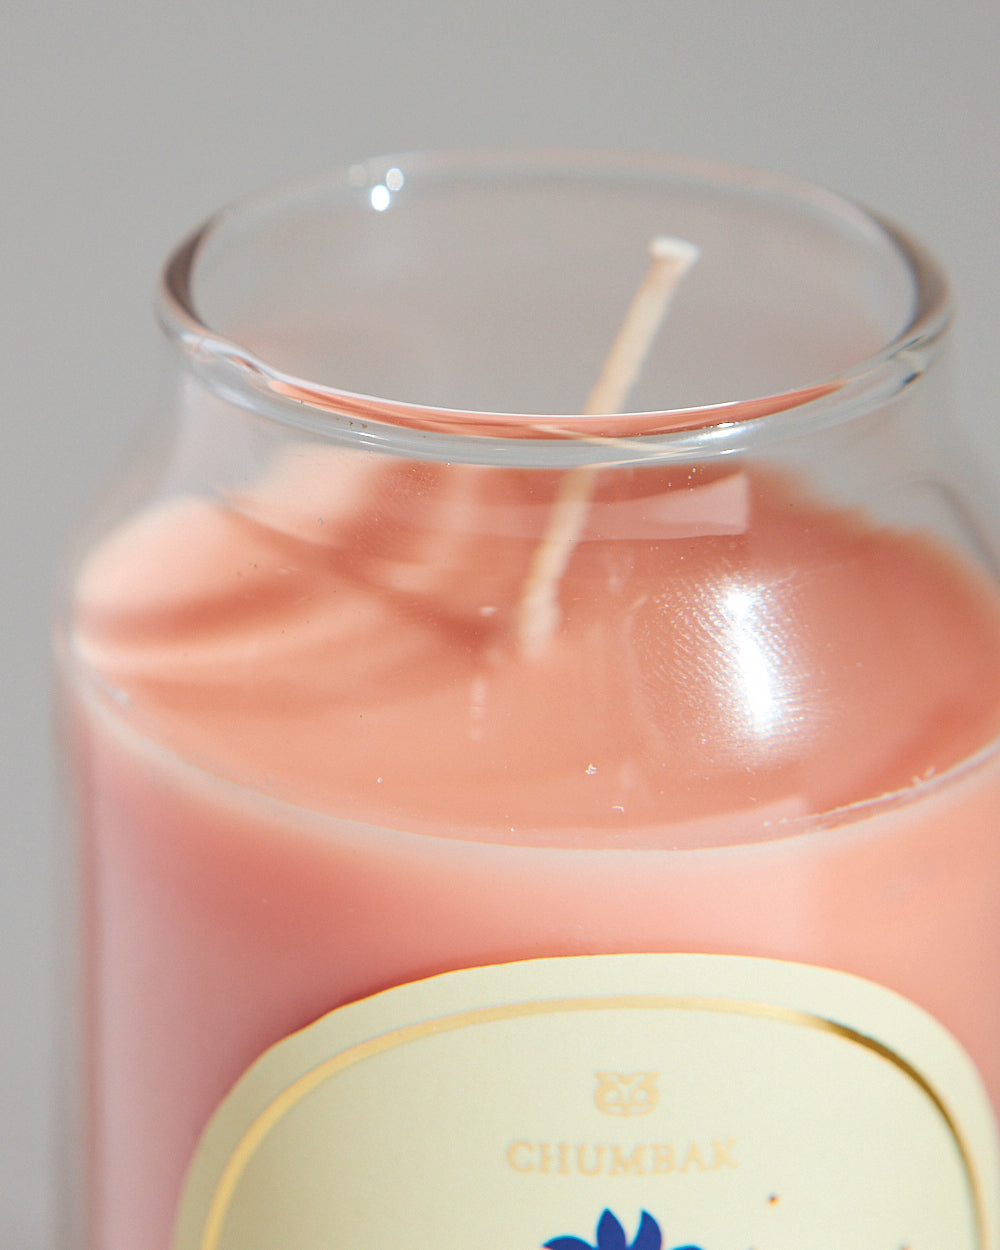 White Tea & Pomegranate Soy Wax Candle, 265g